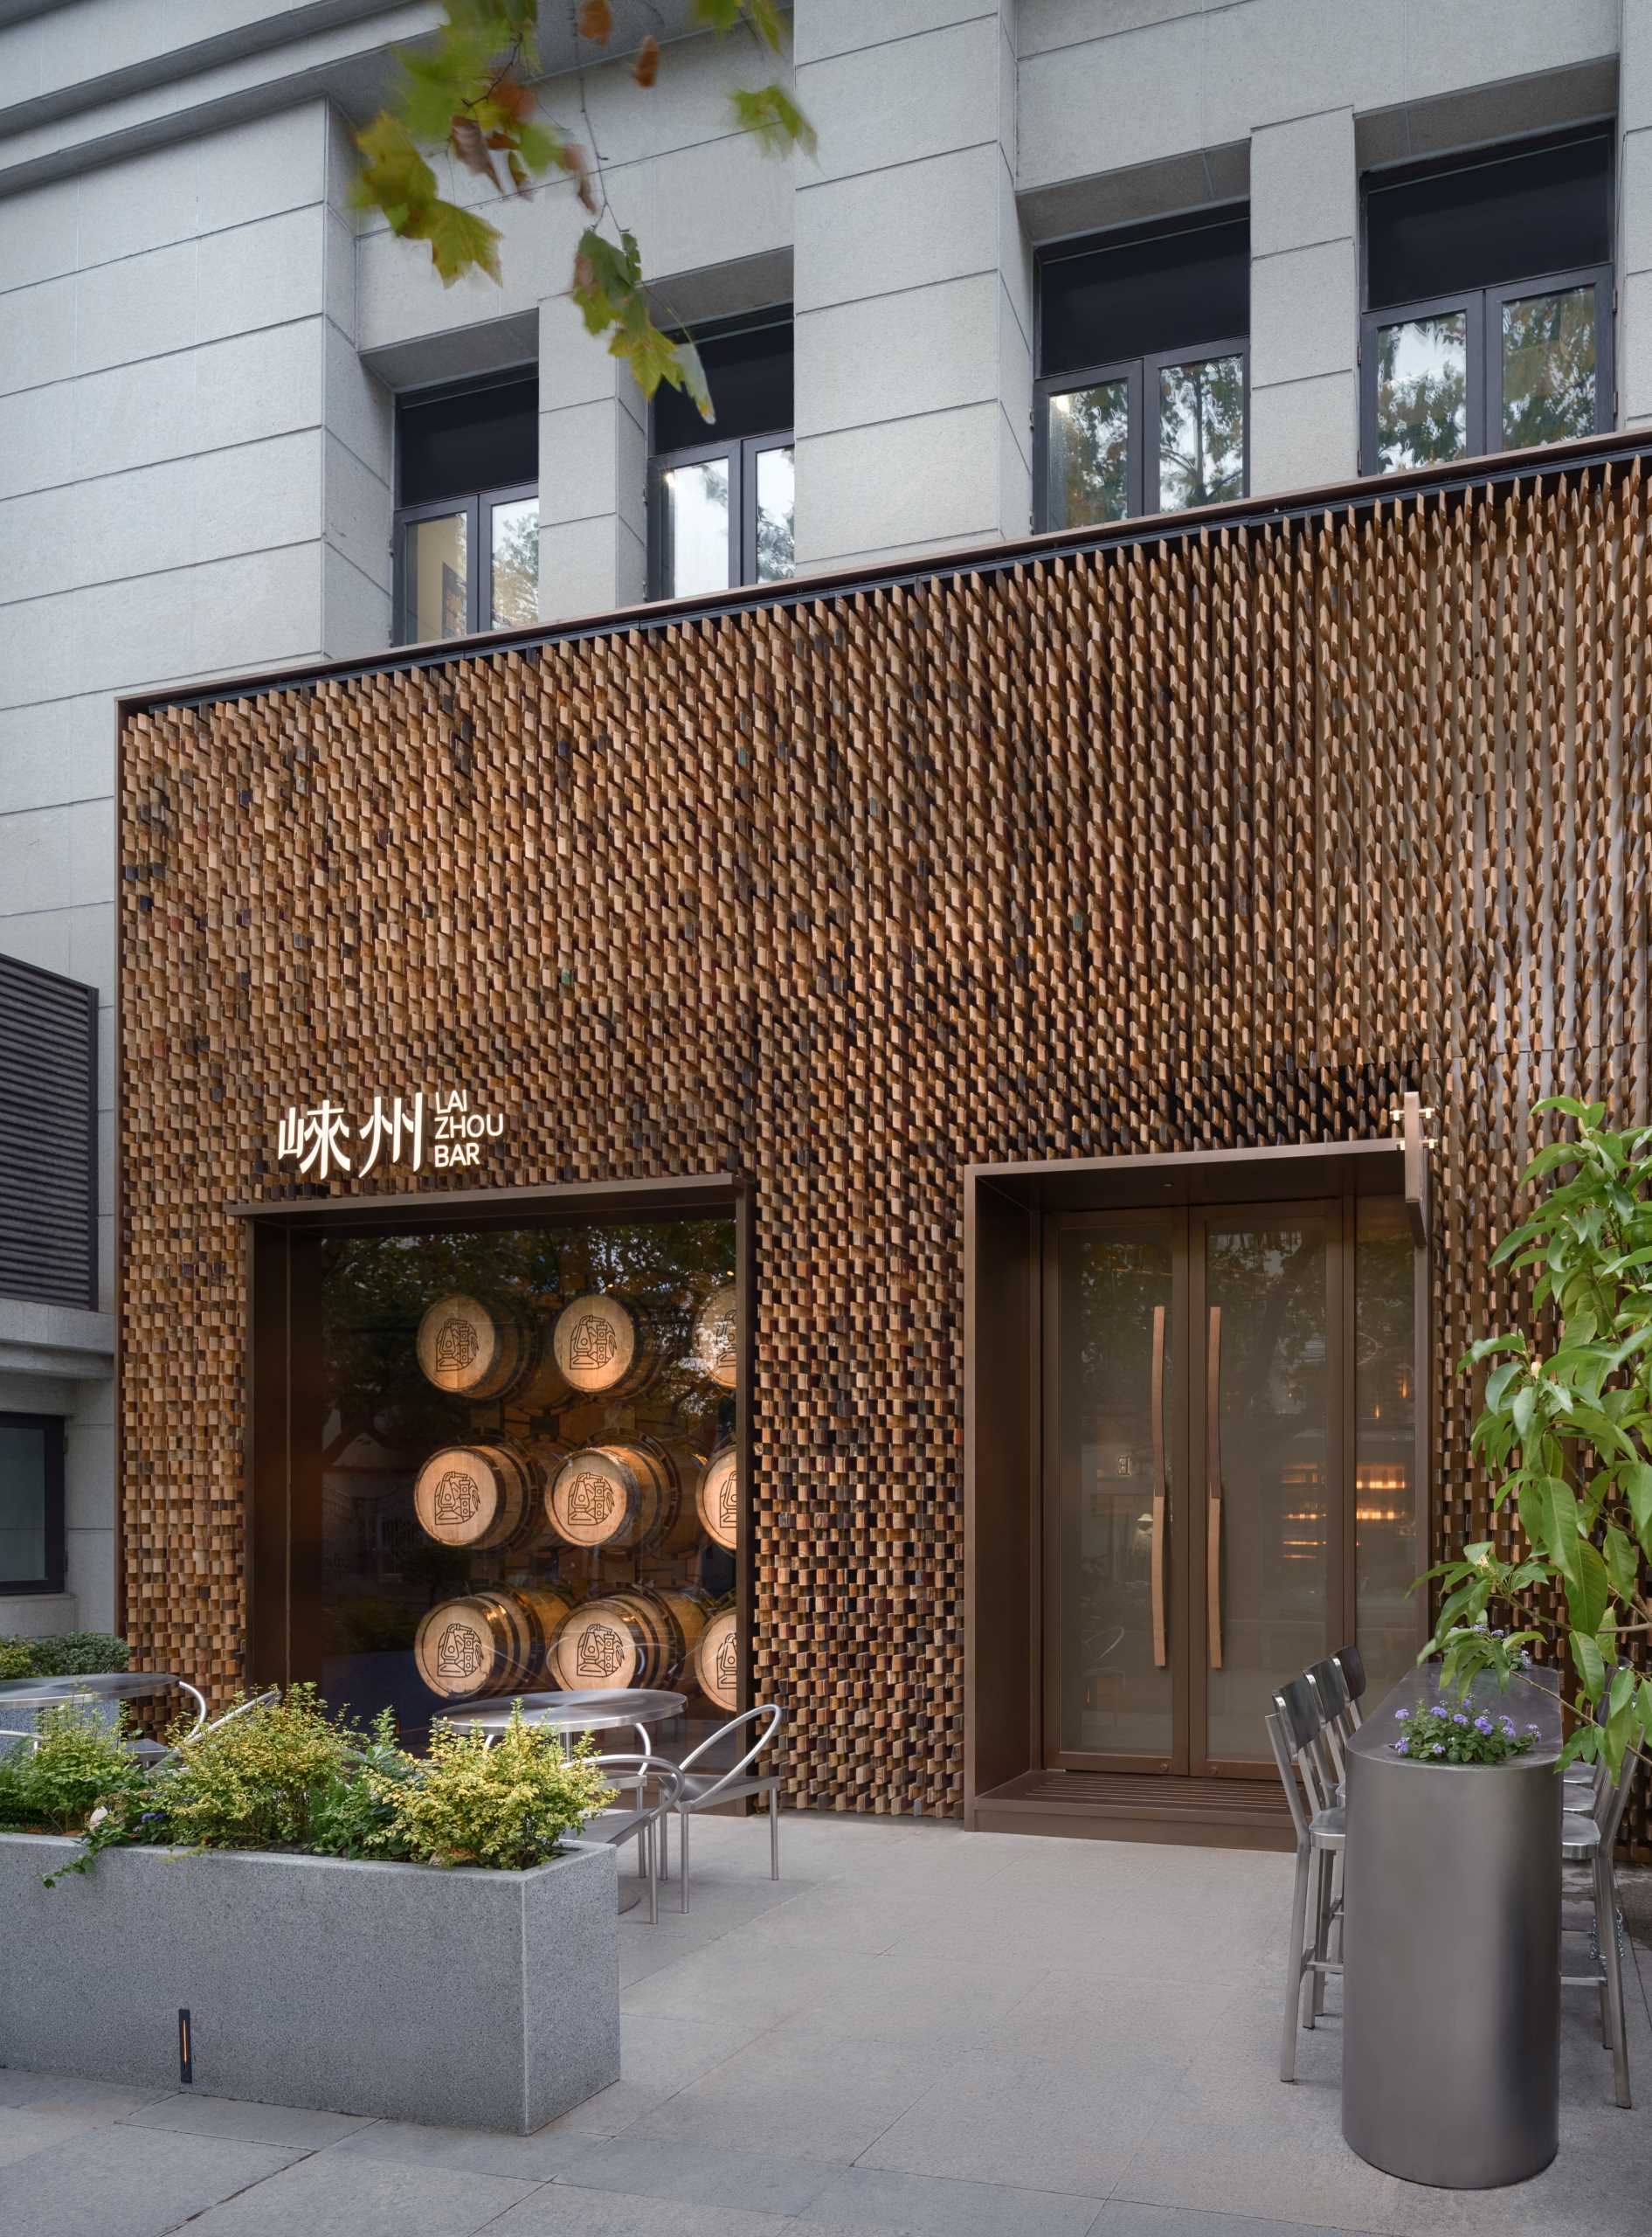 6000 pieces of discarded wooden whiskey barrels were recycled to make the facade of this modern bar.